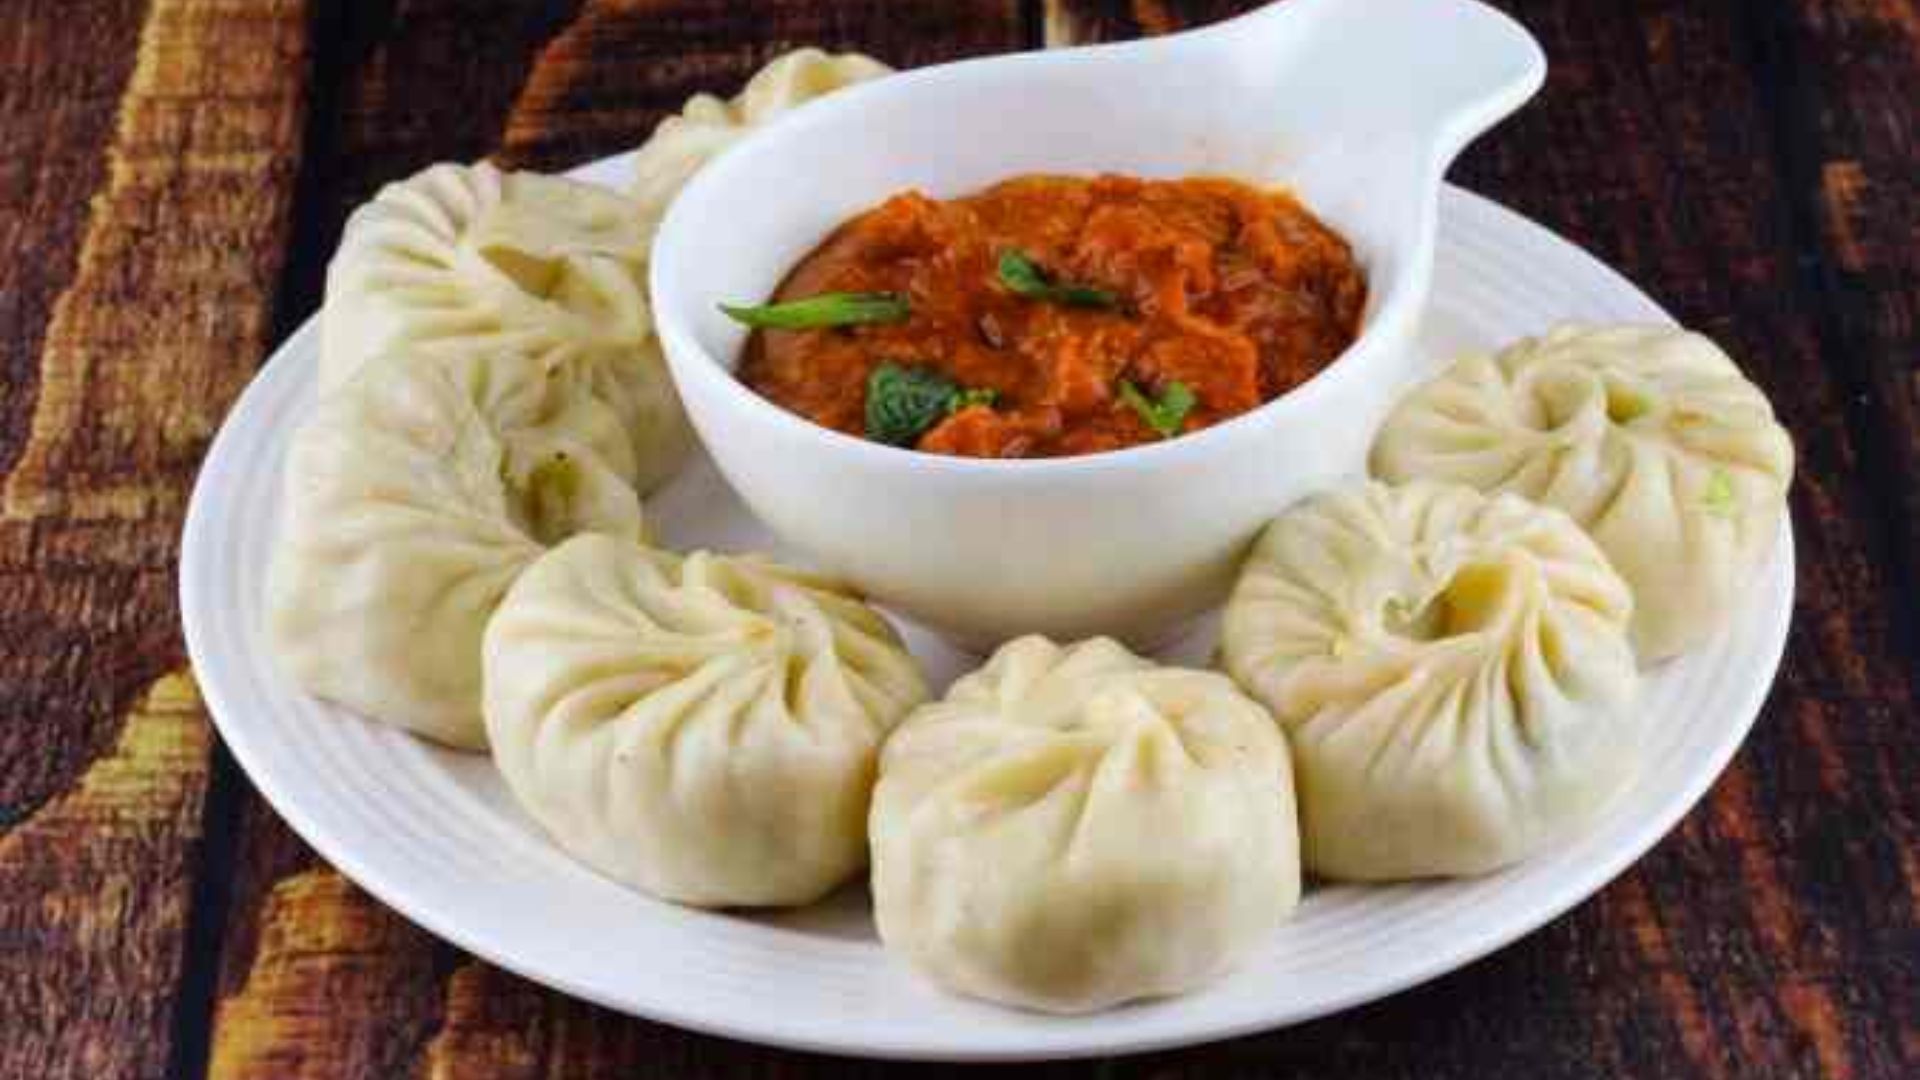 Zomato Fined Rs 60,000 By Karnataka Court For Failing To Deliver Rs 133.25 Momos